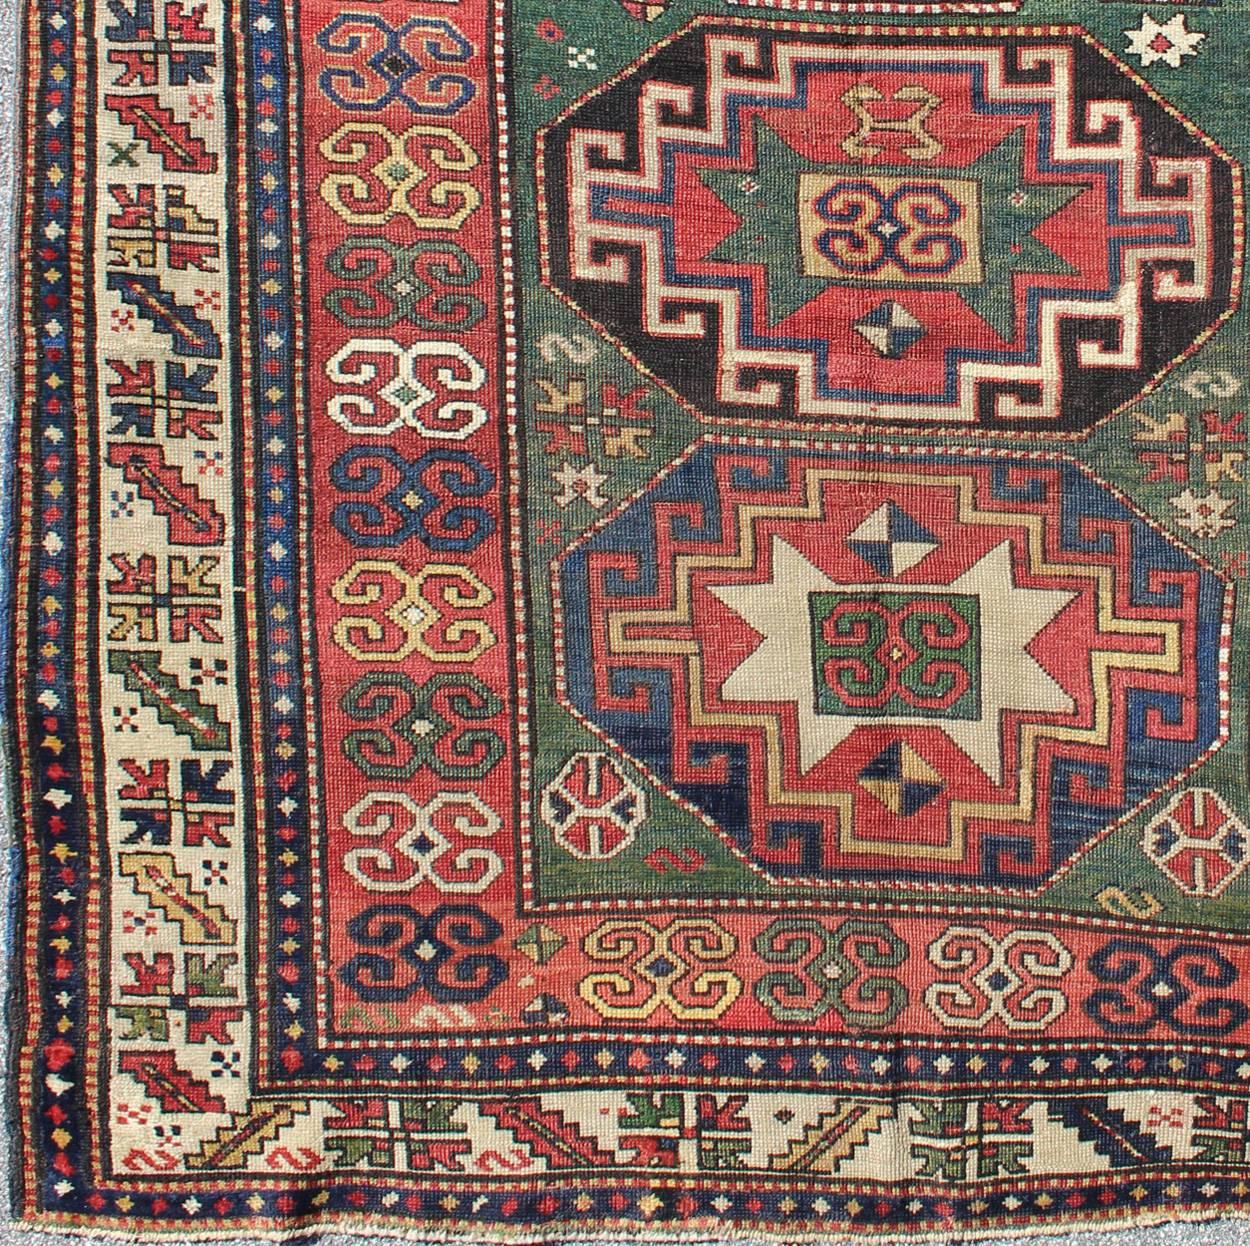 Measures: 5'5 x 7'1.

This antique Kazak, from the late 19th century, showcases three distinctive medallions that identify it as an antique Kazak. The field pattern has latch hooks mandalas consistent with Kaza-Bordjalou, the green ground and boxed